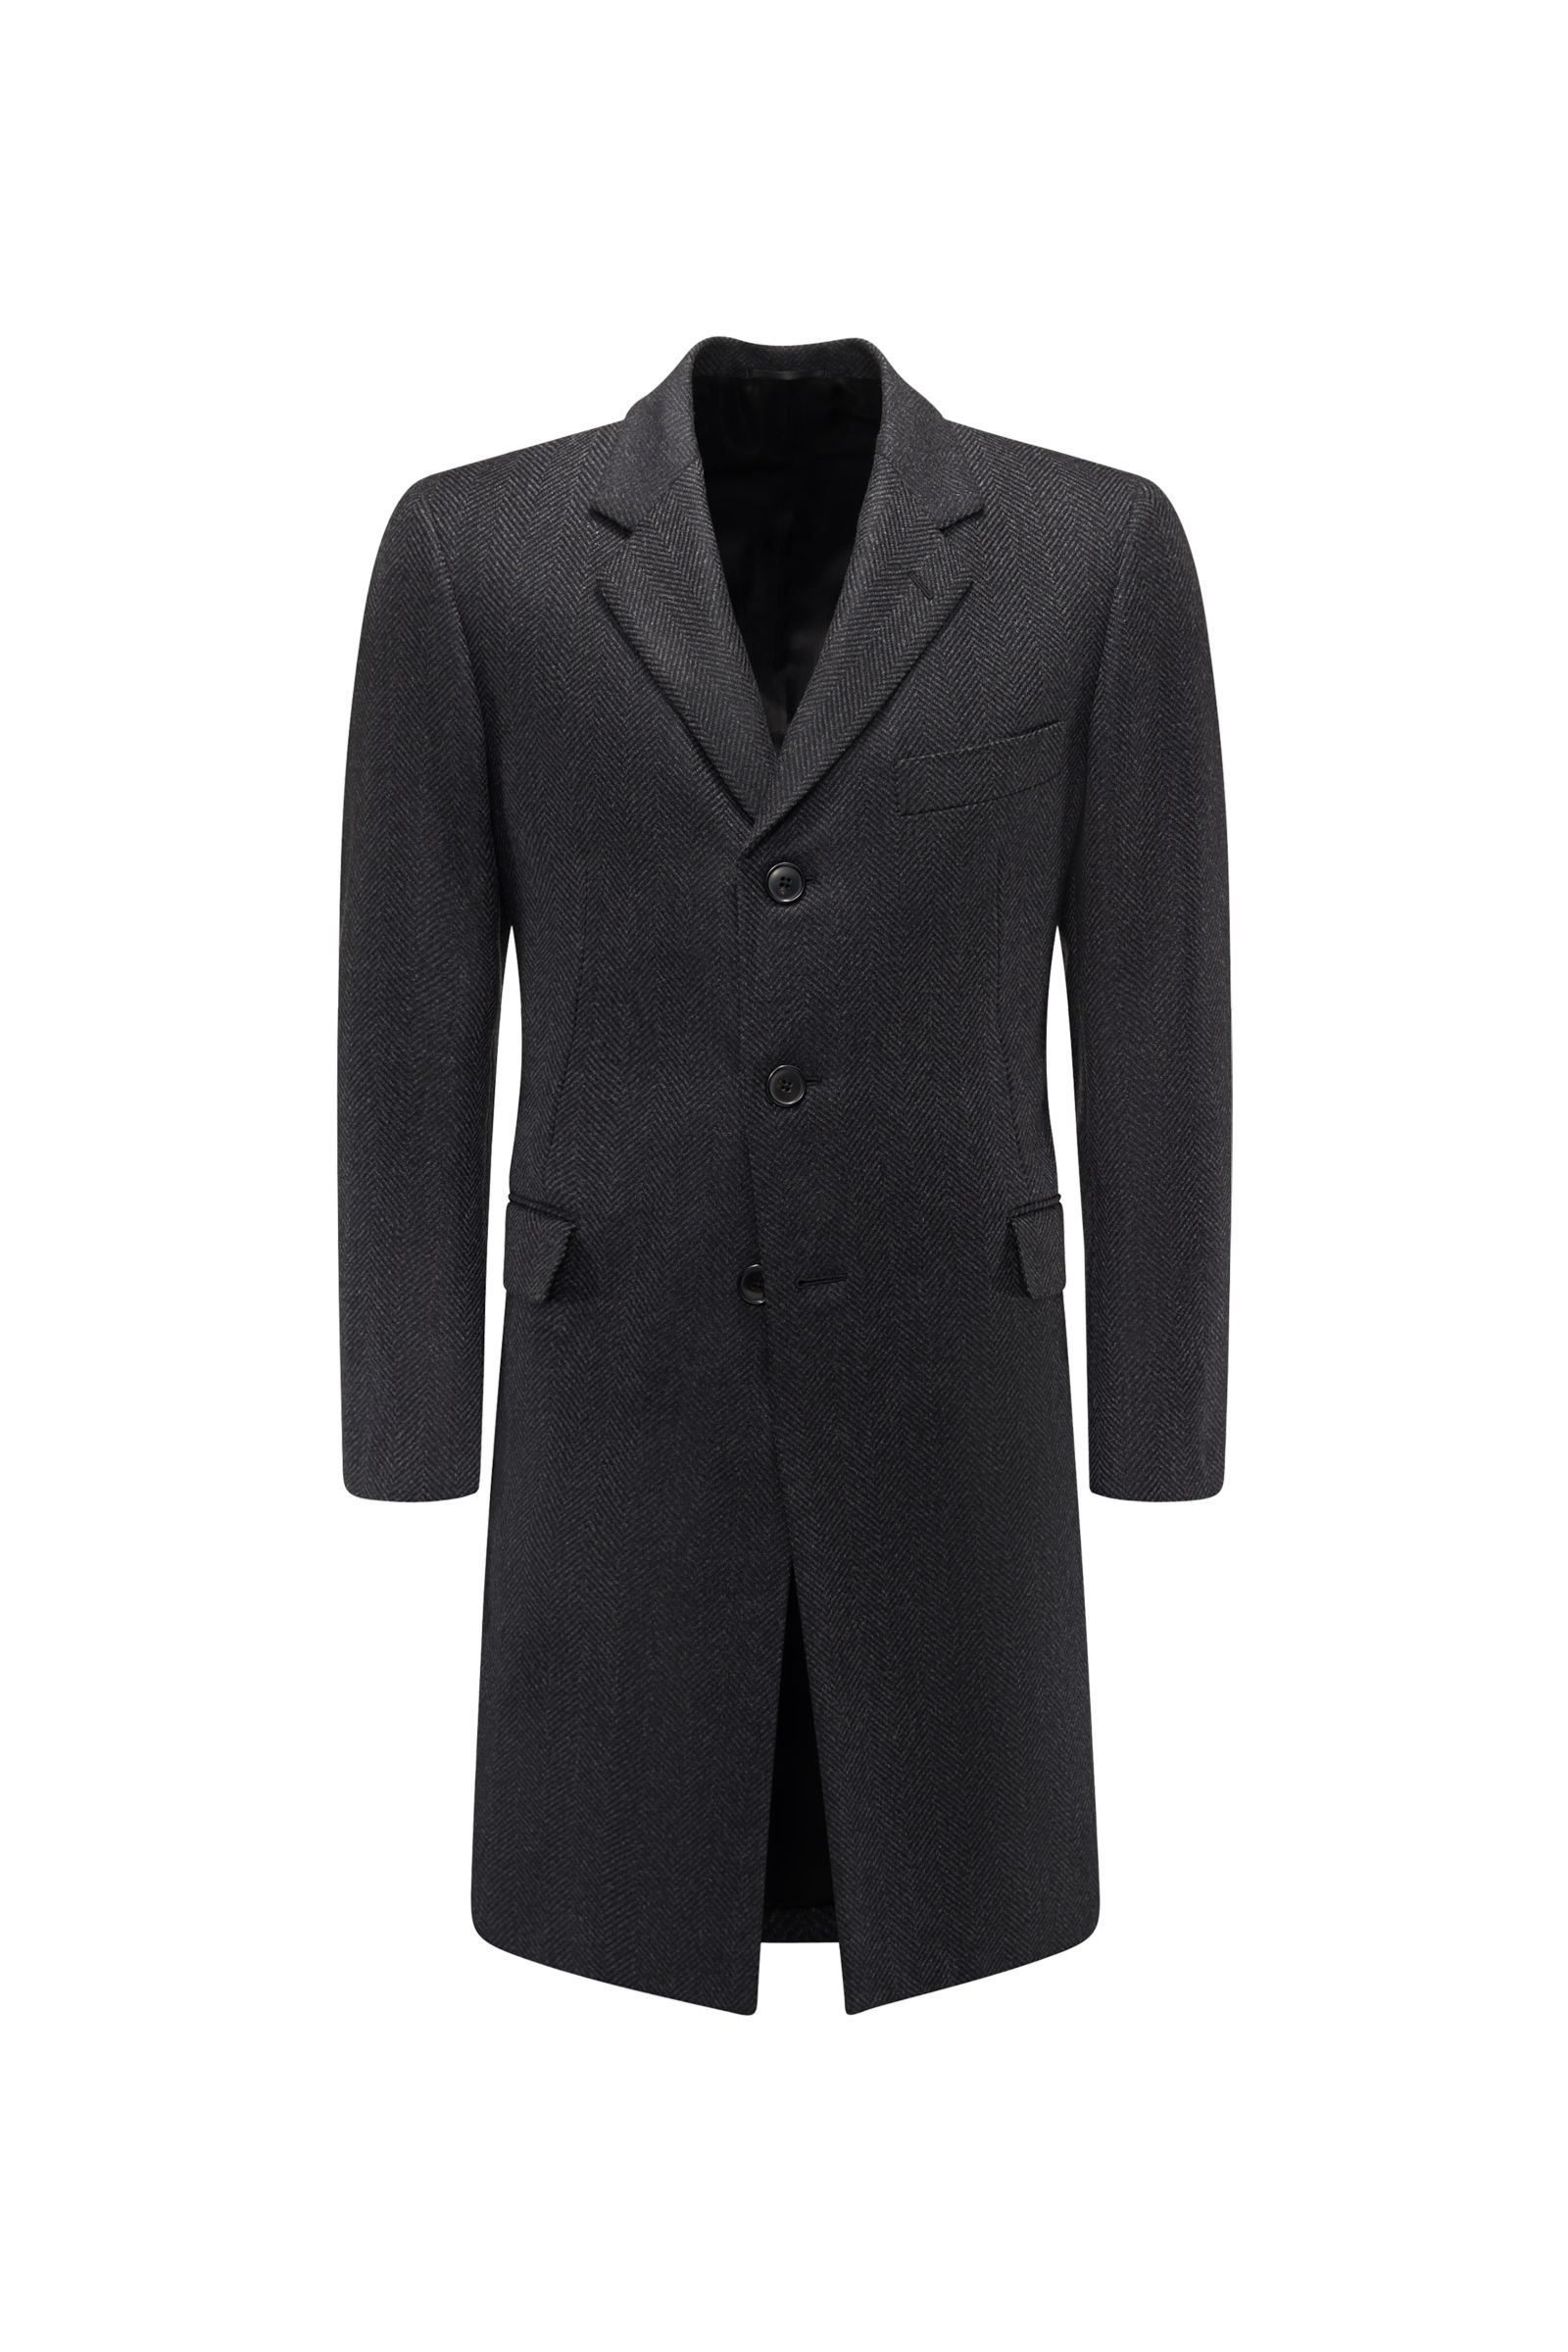 Cashmere coat anthracite patterned